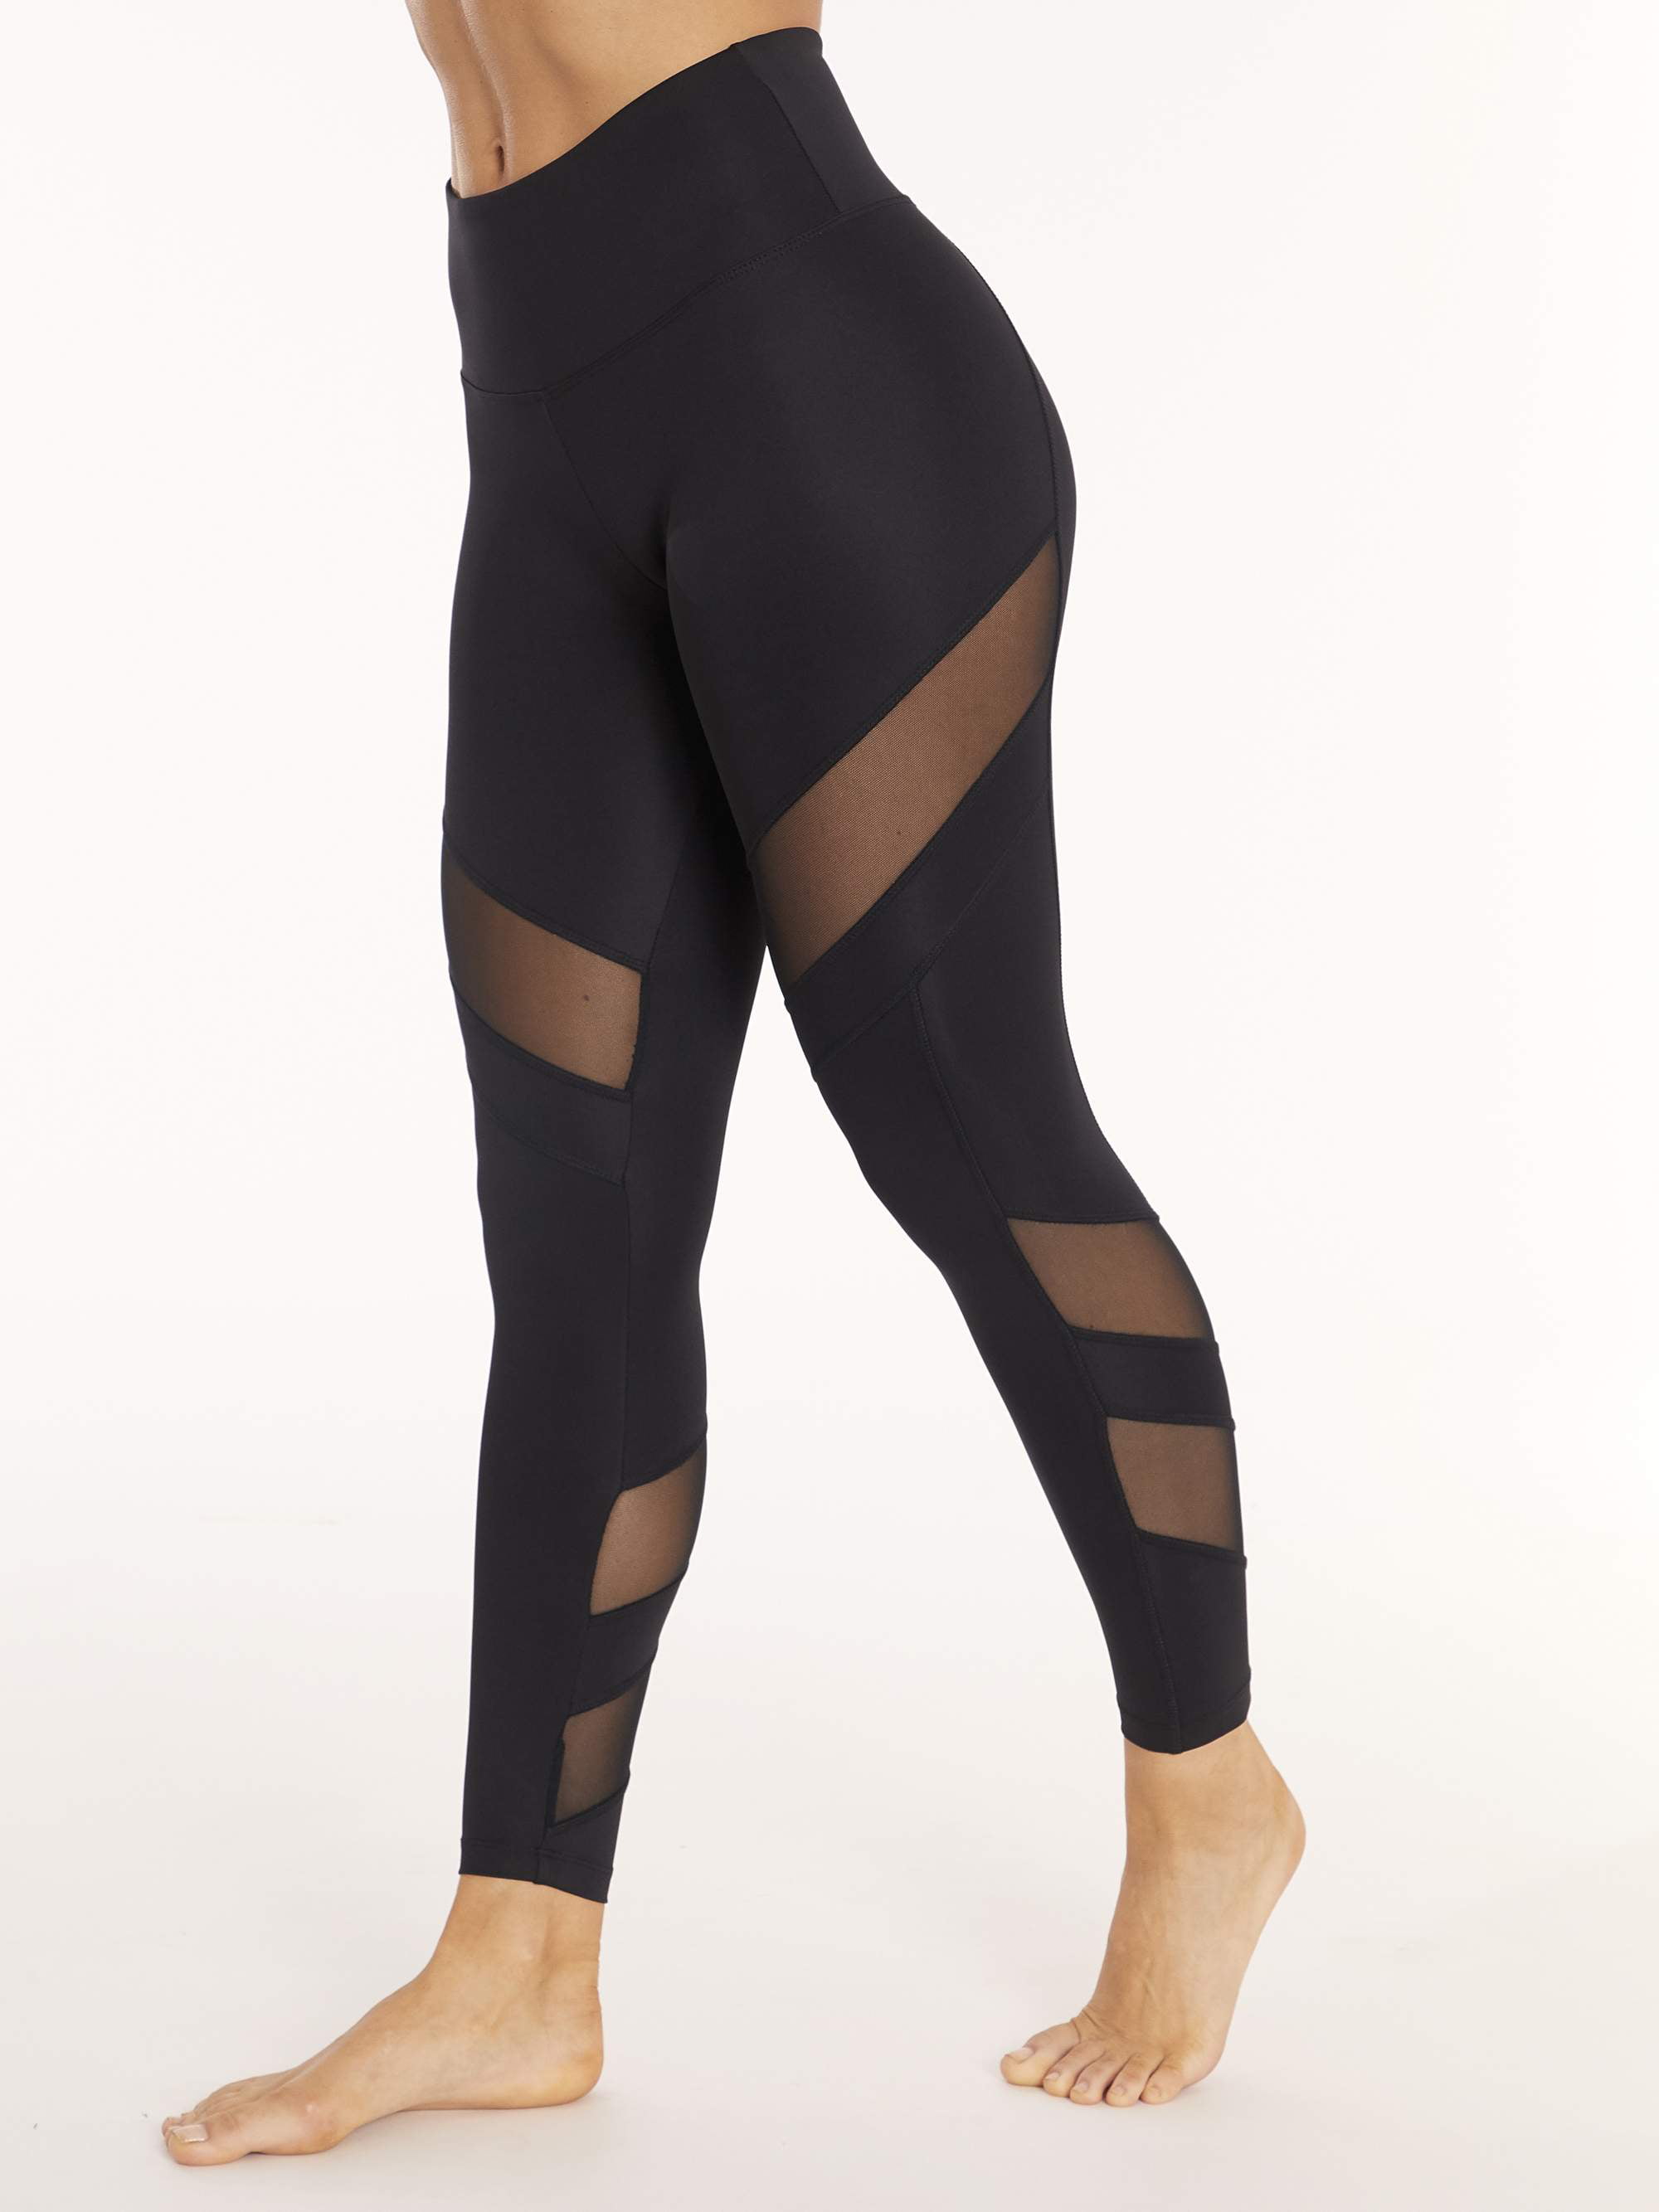 Sports Pants from Bally Total Fitness for Women in Black